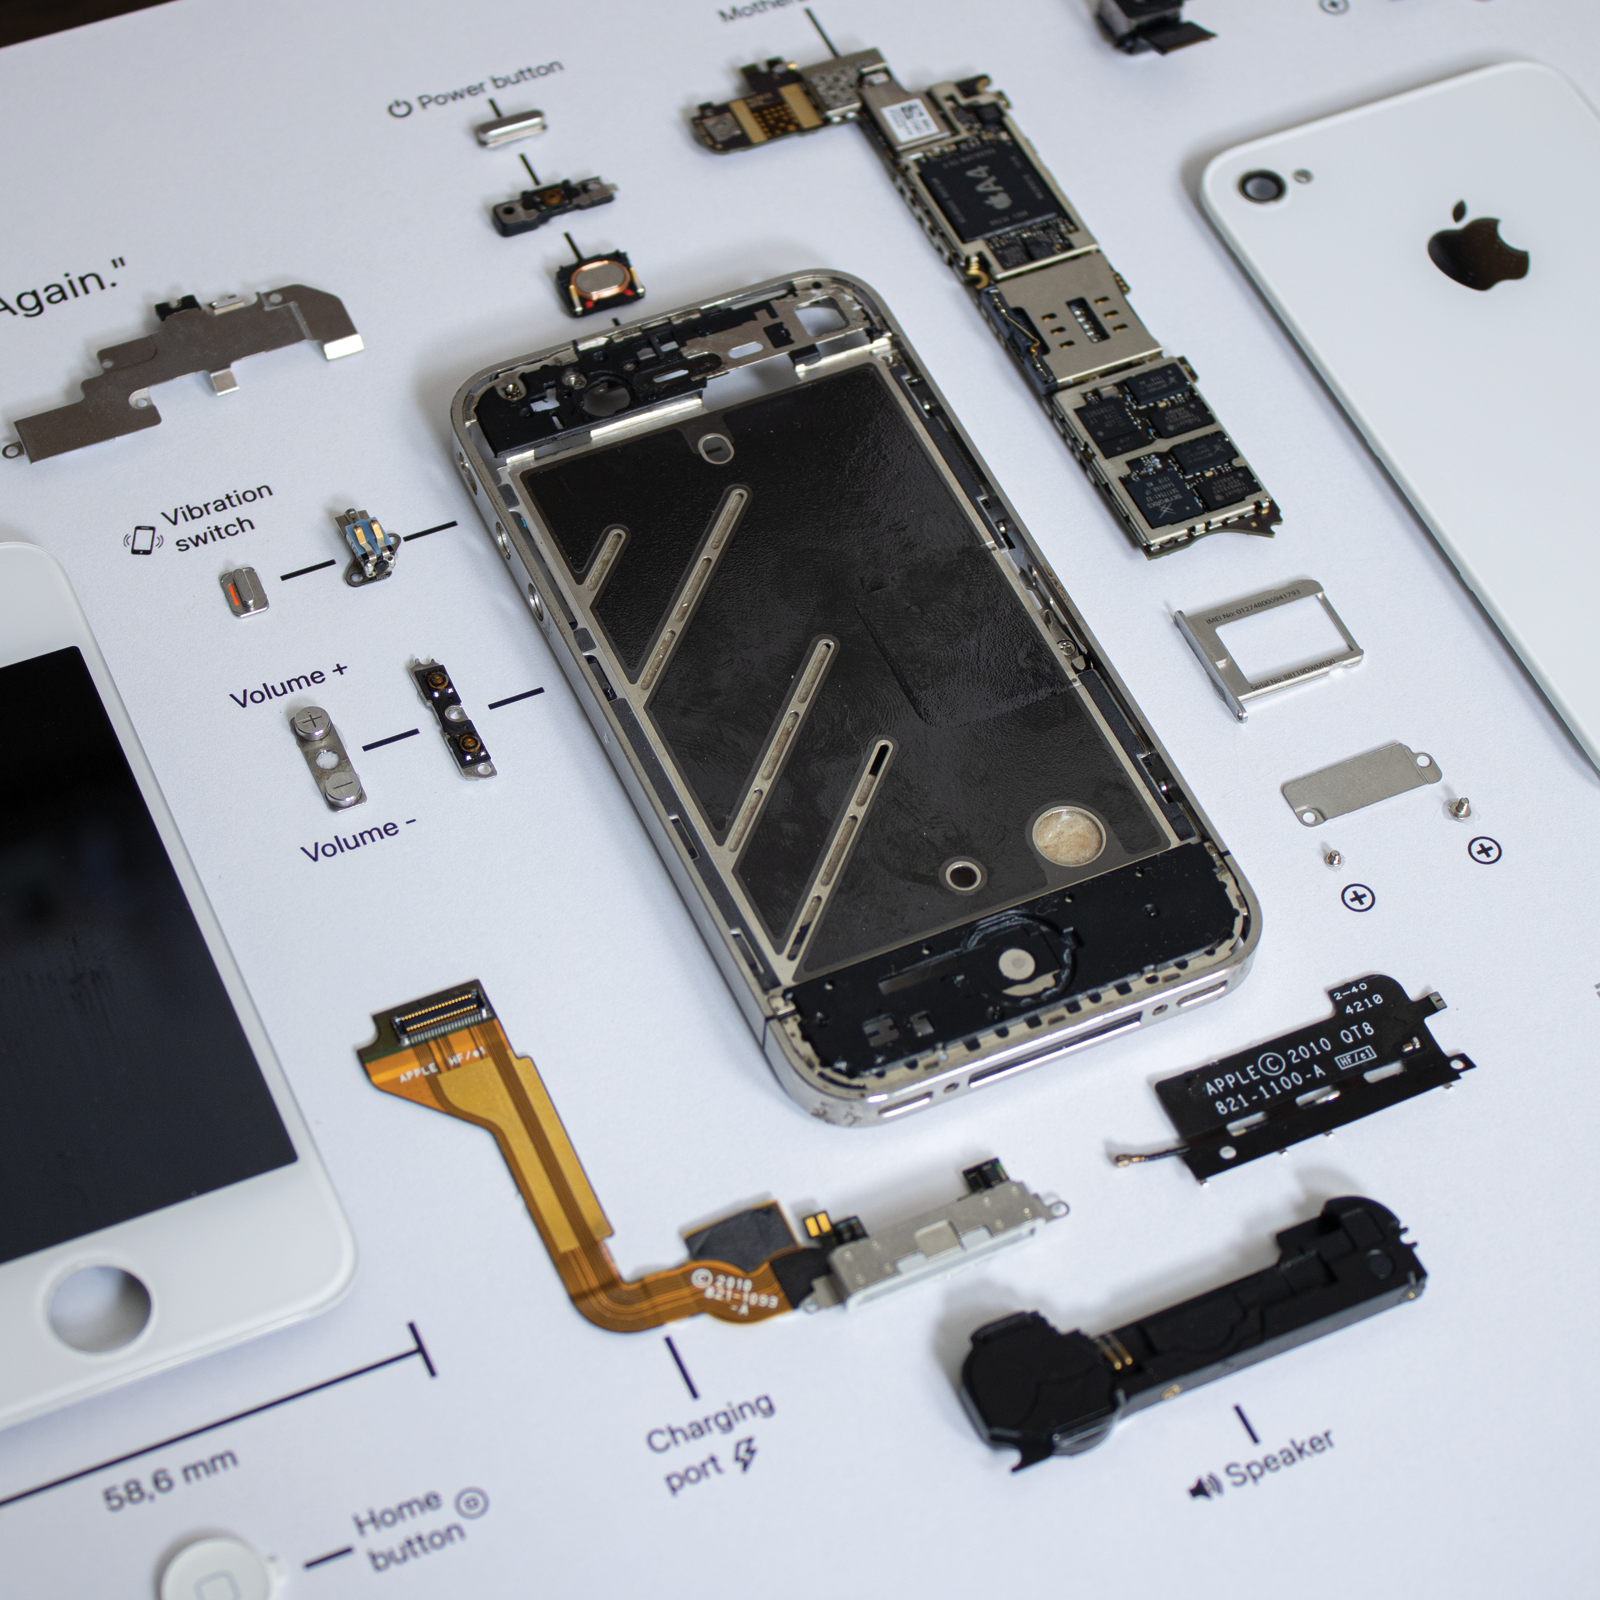 iPhone 4 disassembled in a frame